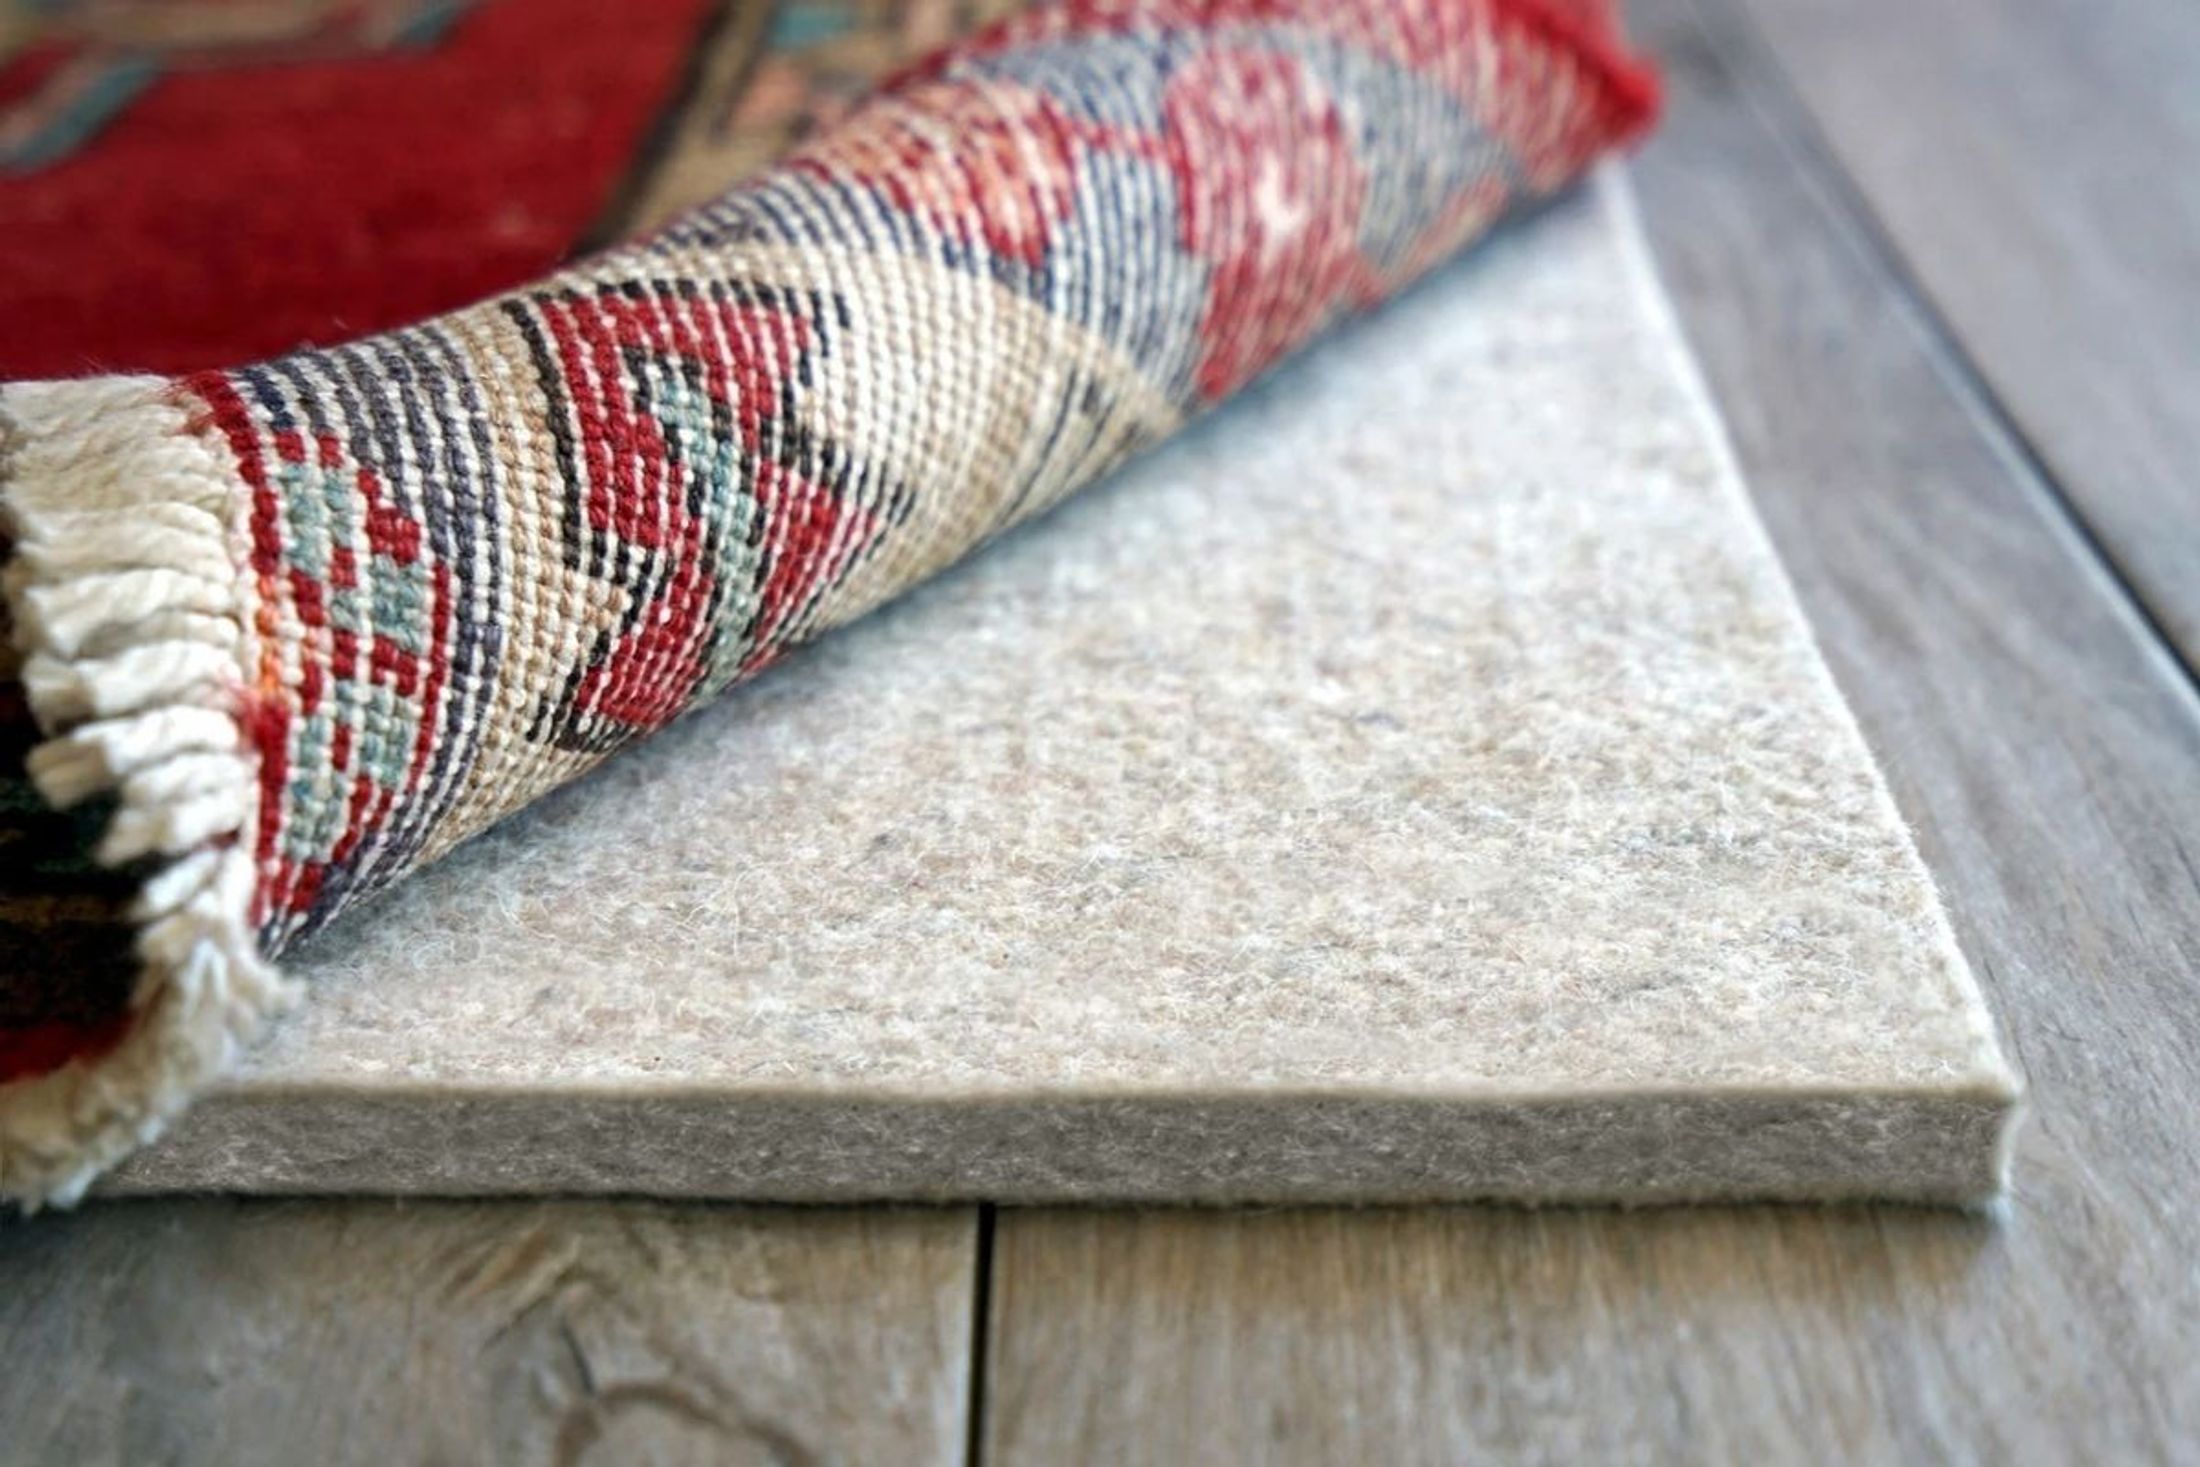 Does Carpet Padding Really Make A Difference? - Loudoun Valley Floors